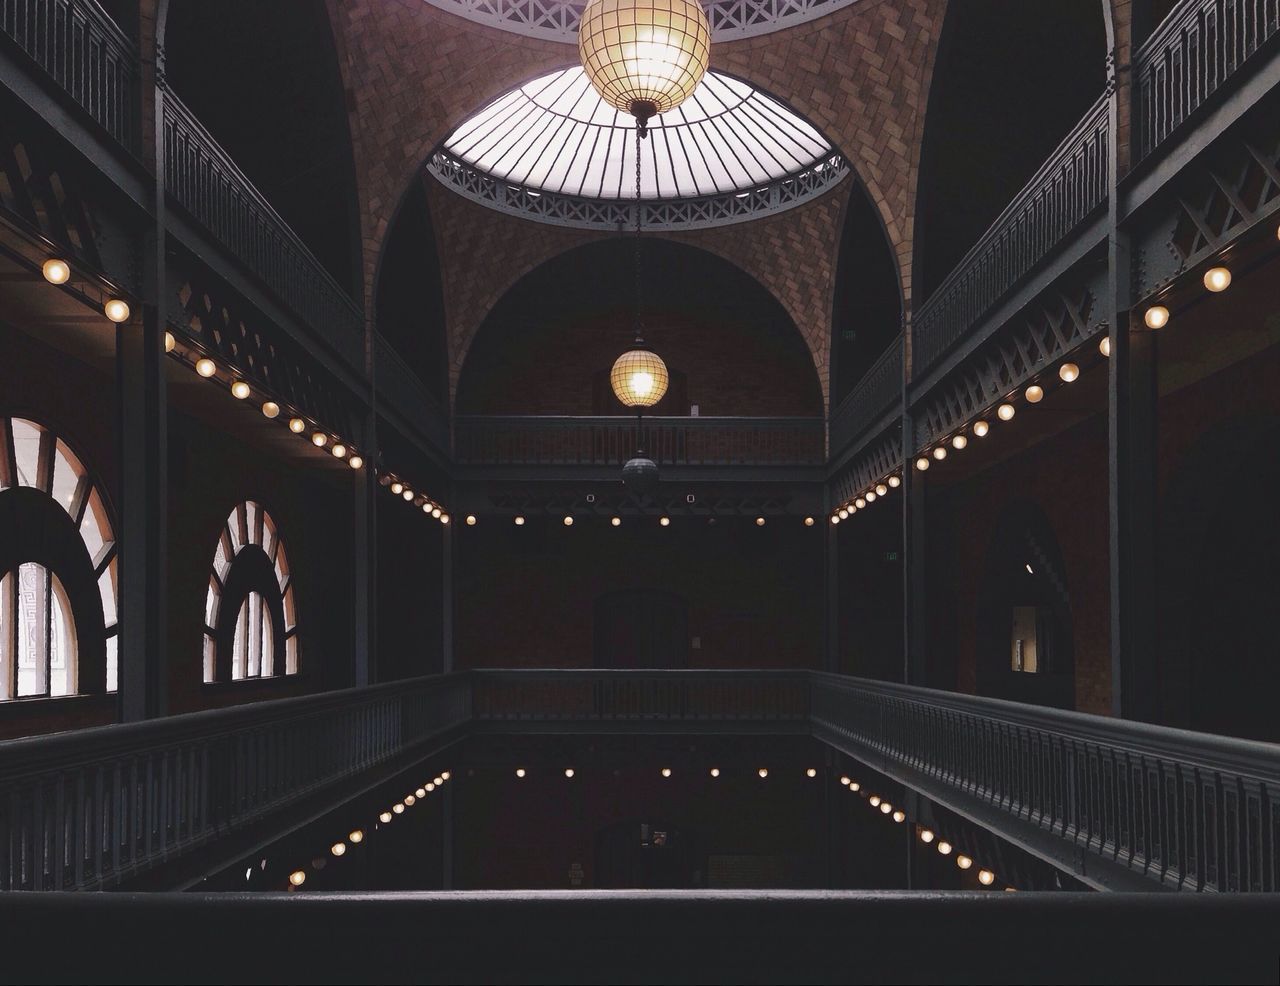 illuminated, indoors, architecture, built structure, night, ceiling, lighting equipment, arch, interior, religion, ornate, chandelier, light - natural phenomenon, no people, architectural feature, corridor, travel destinations, place of worship, pattern